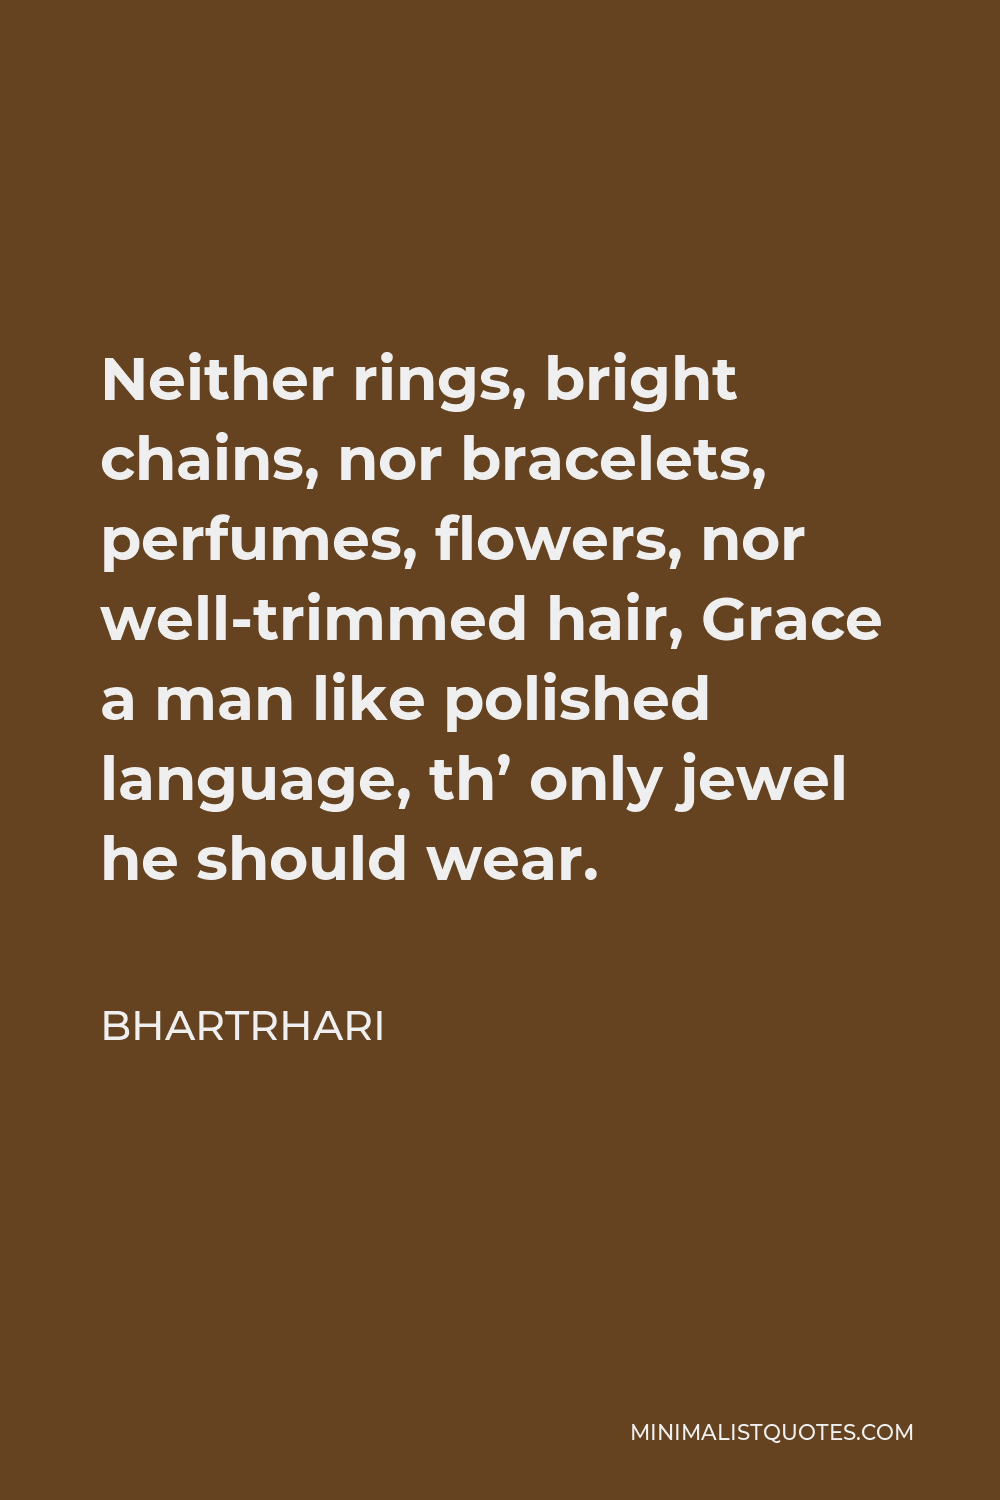 Bhartrhari Quote - Neither rings, bright chains, nor bracelets, perfumes, flowers, nor well-trimmed hair, Grace a man like polished language, th’ only jewel he should wear.